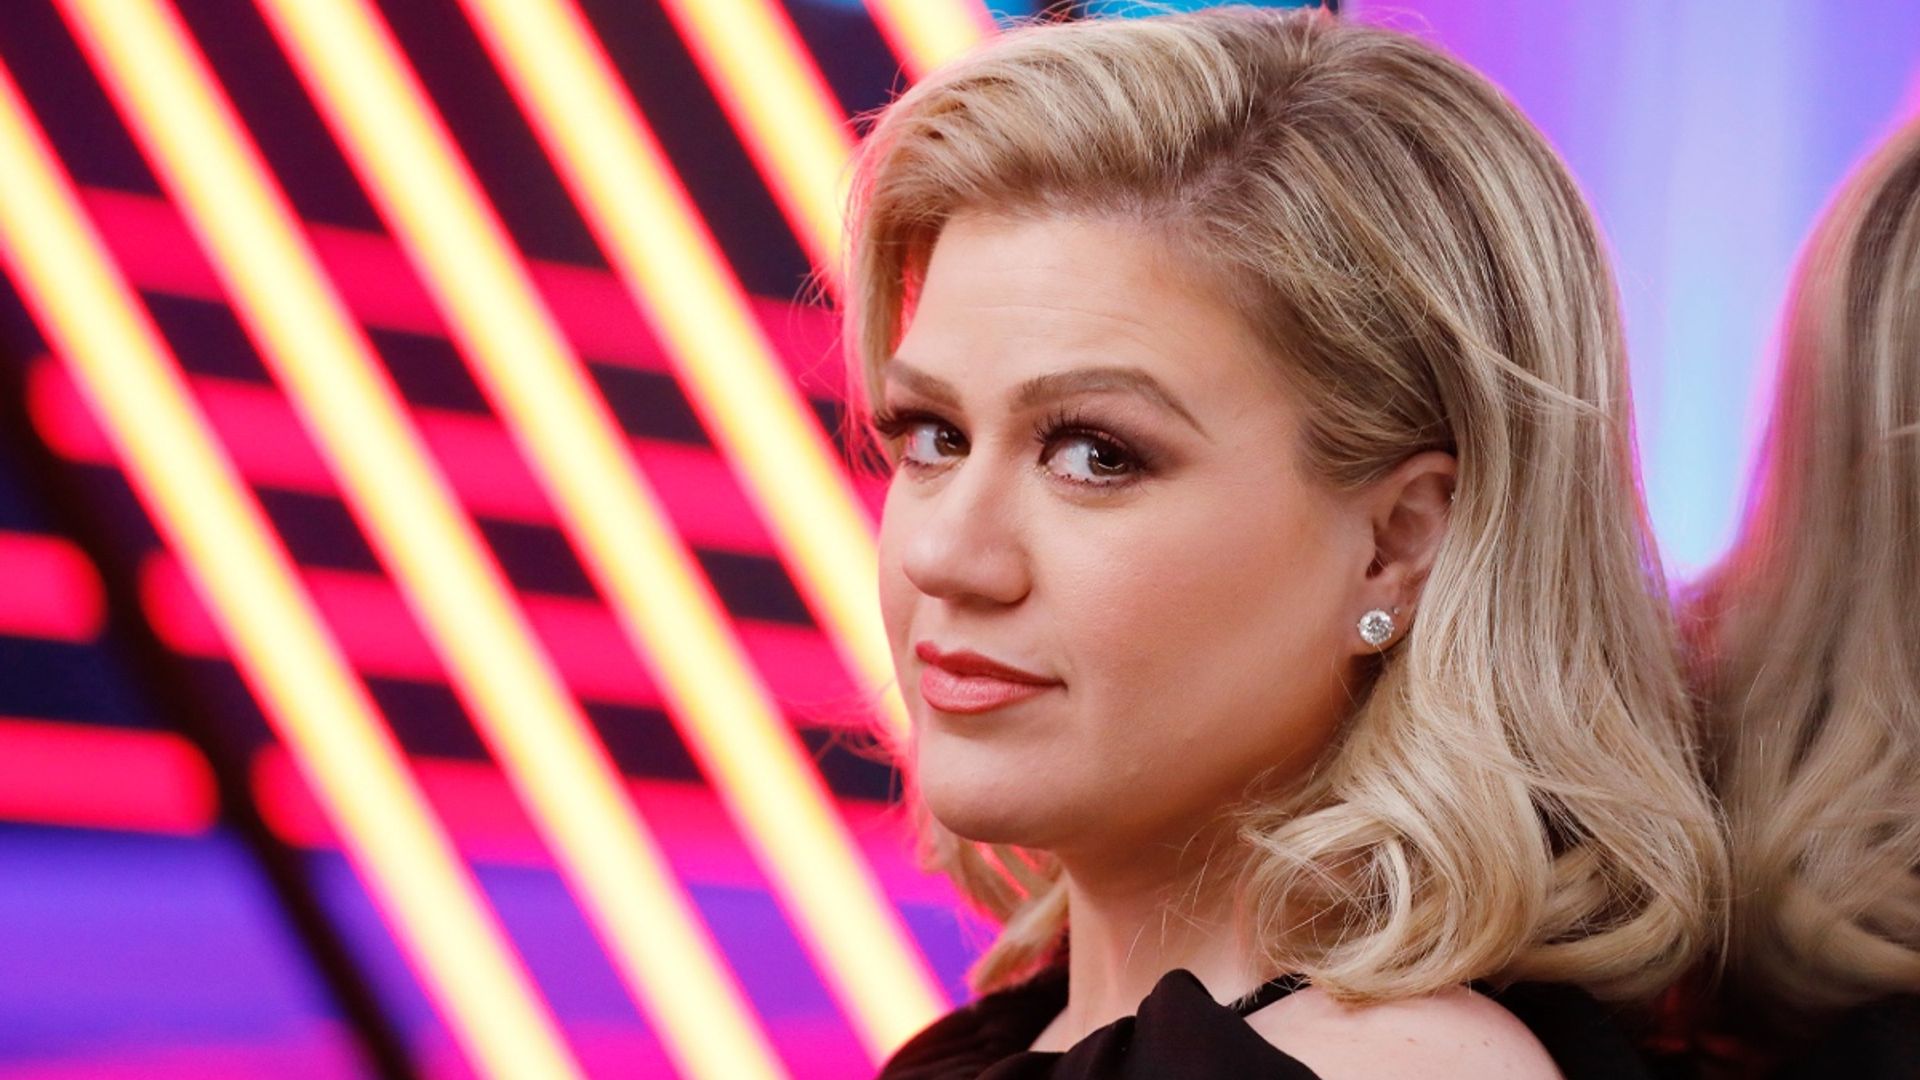 Kelly Clarkson calls out 'contractually obligated' career move on her show